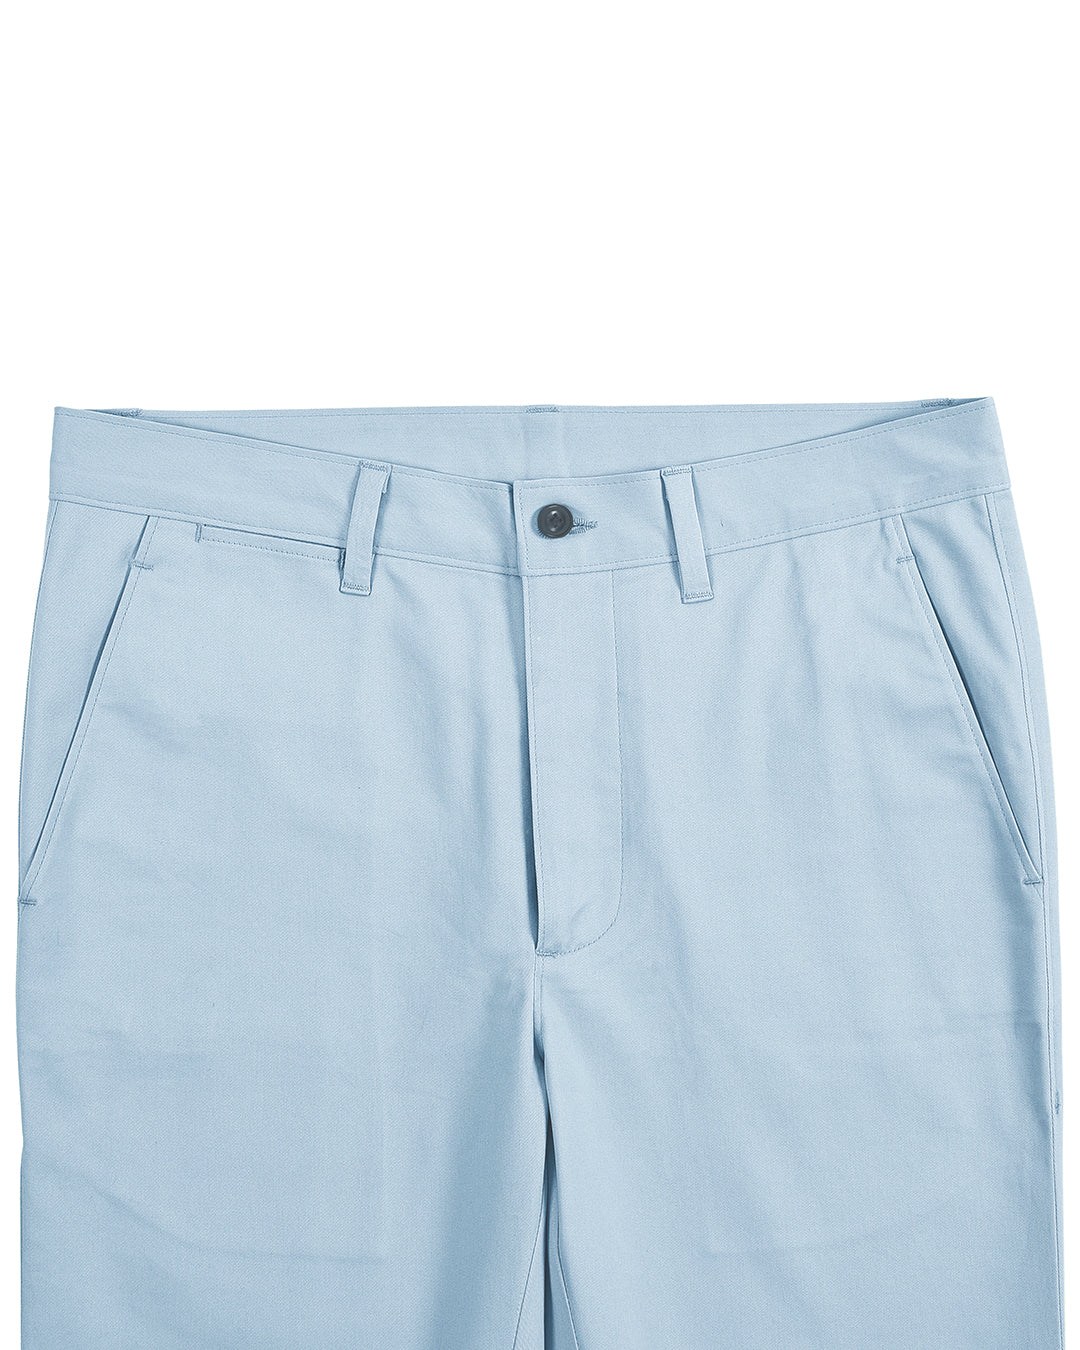 Front view of custom Genoa Chino pants for men by Luxire in powder blue